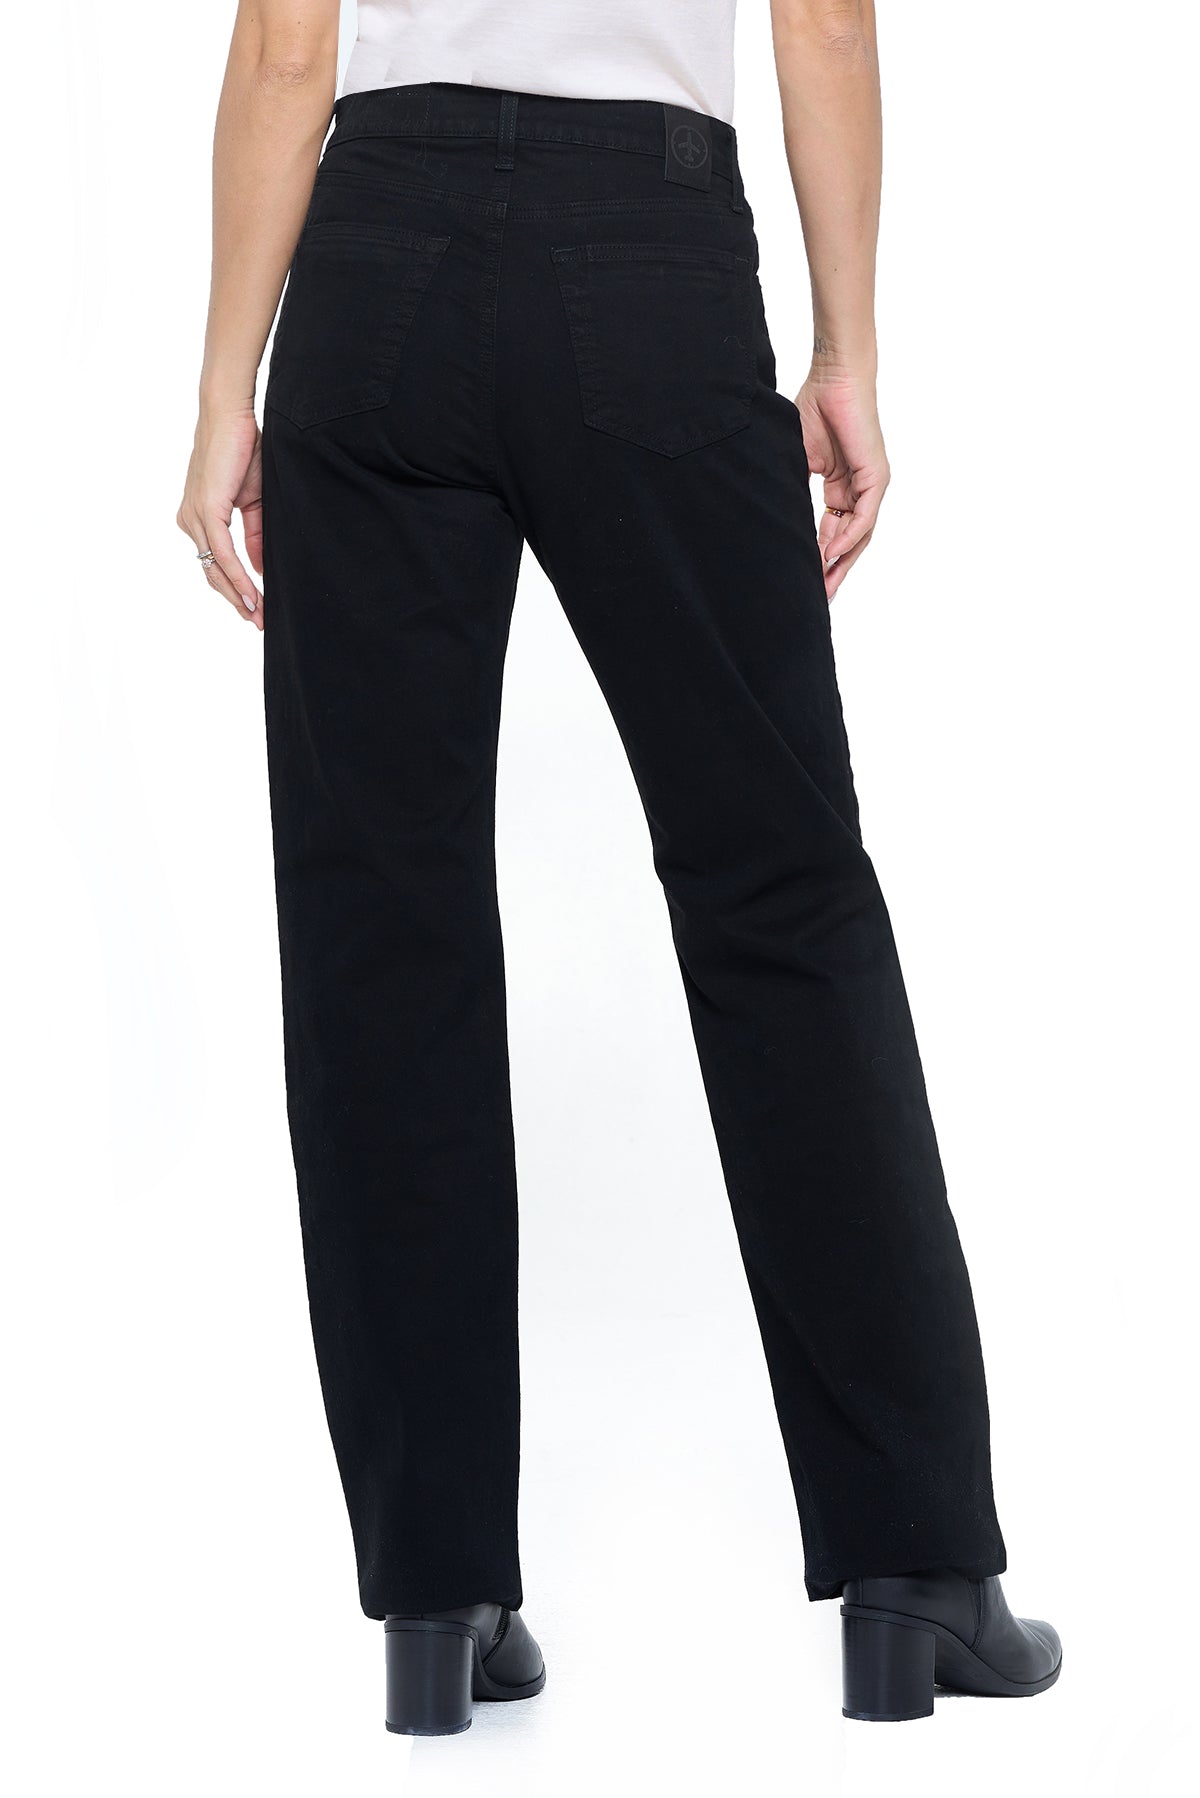 A New Day Stretch Cropped Pull On Pants Women's 18 Black Straight Leg Dark  Wash